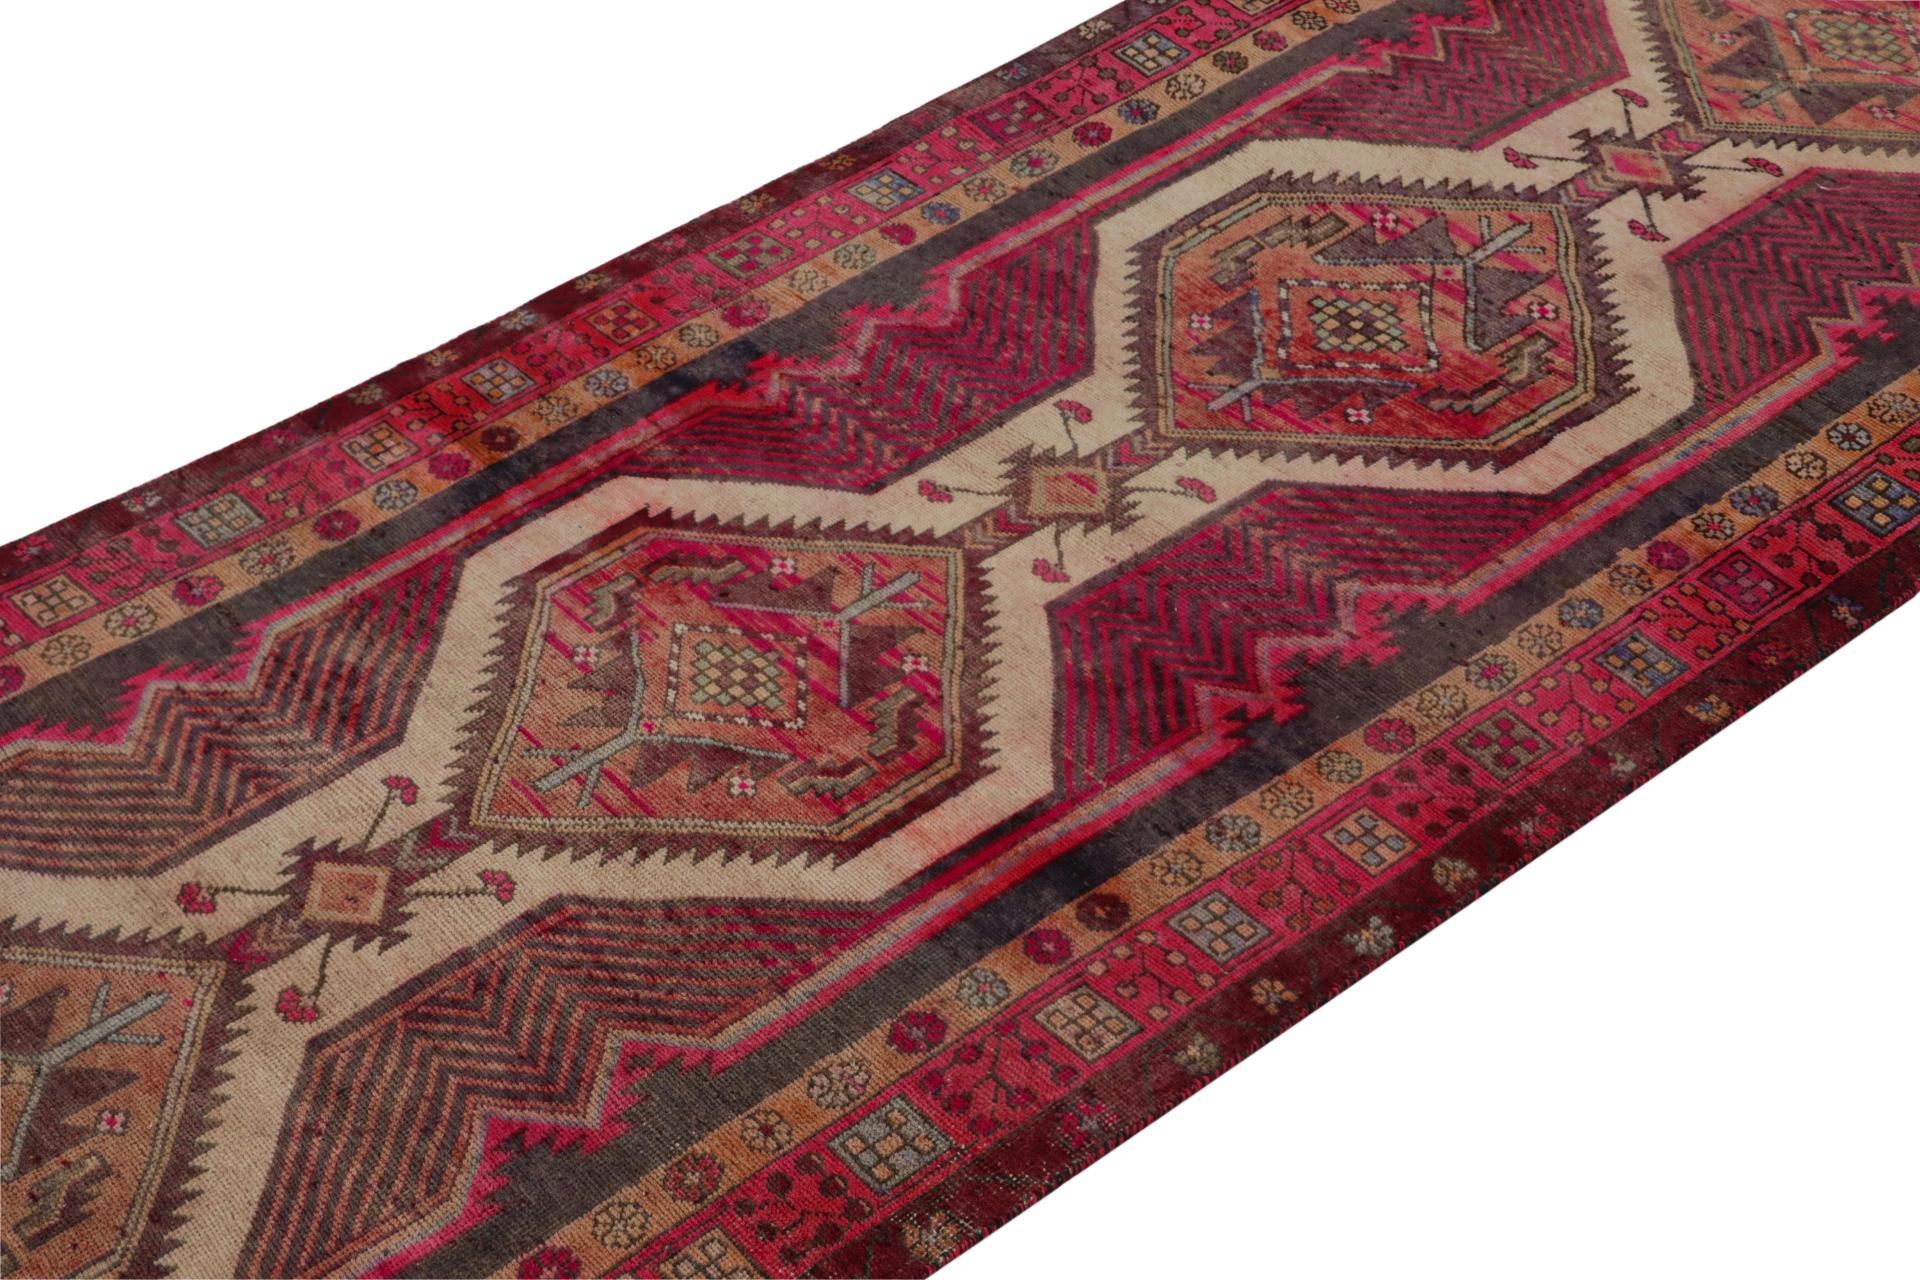 Vintage Persian runner with Red, Beige-Brown Patterns by Rug & Kilim In Good Condition For Sale In Long Island City, NY